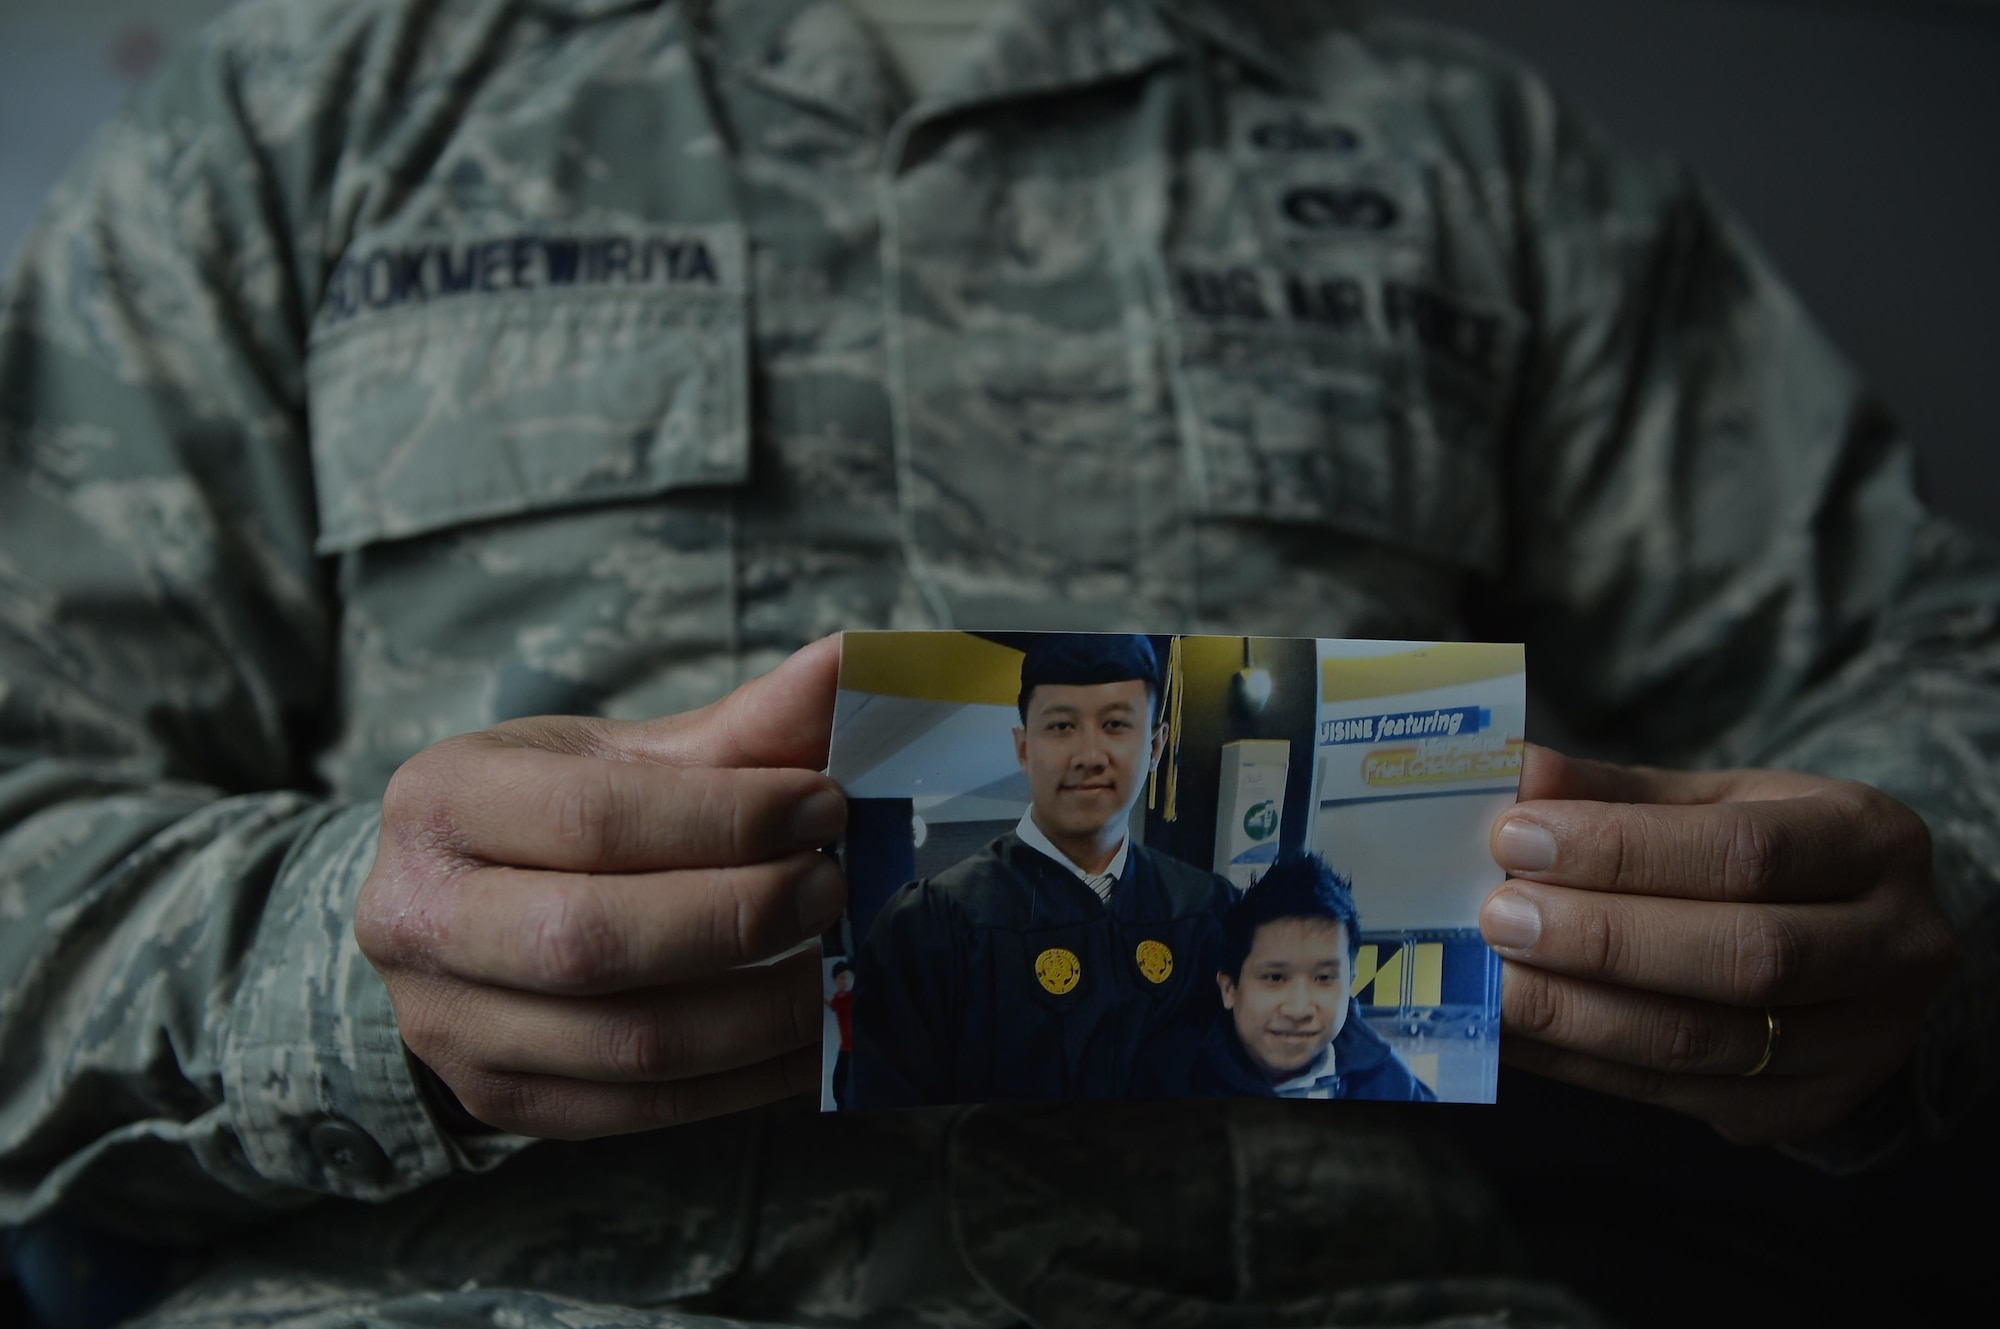 Staff Sgt. Srun Sookmeewiriya, 313th Expeditionary Operations Support Squadron NCO in charge of reports, holds up a picture of him and his younger brother, Thana, on Ramstein Air Base, Germany, Feb. 16, 2017. Sookmeewiriya, who attempted to commit suicide twice, draws inspiration from his brother to remain resilient and encourages Airmen to open up about their struggles. (U.S. Air Force photo by Airman 1st Class Joshua Magbanua)